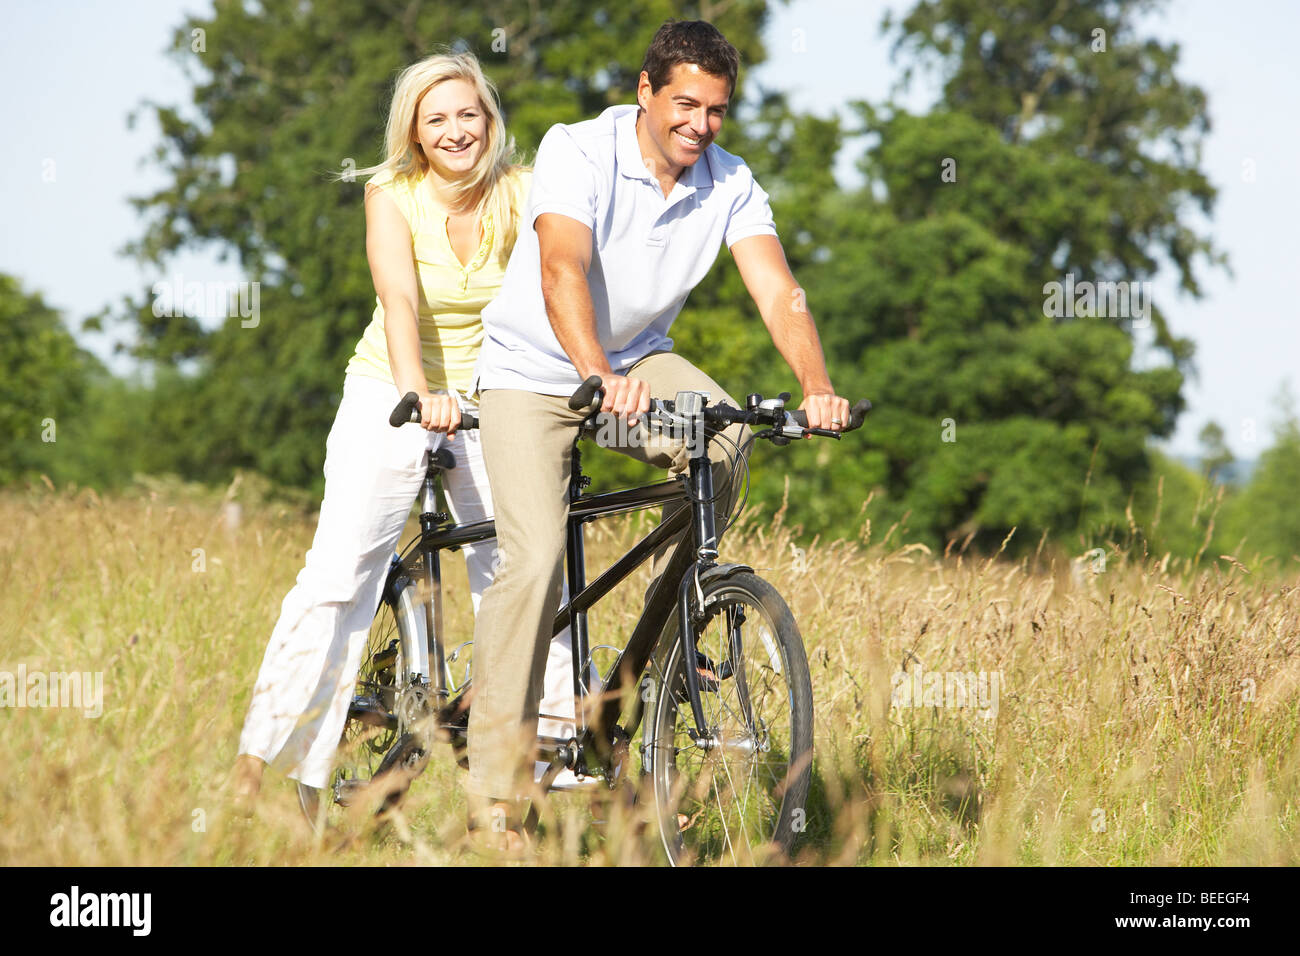 Couple riding tandem in countryside Stock Photo